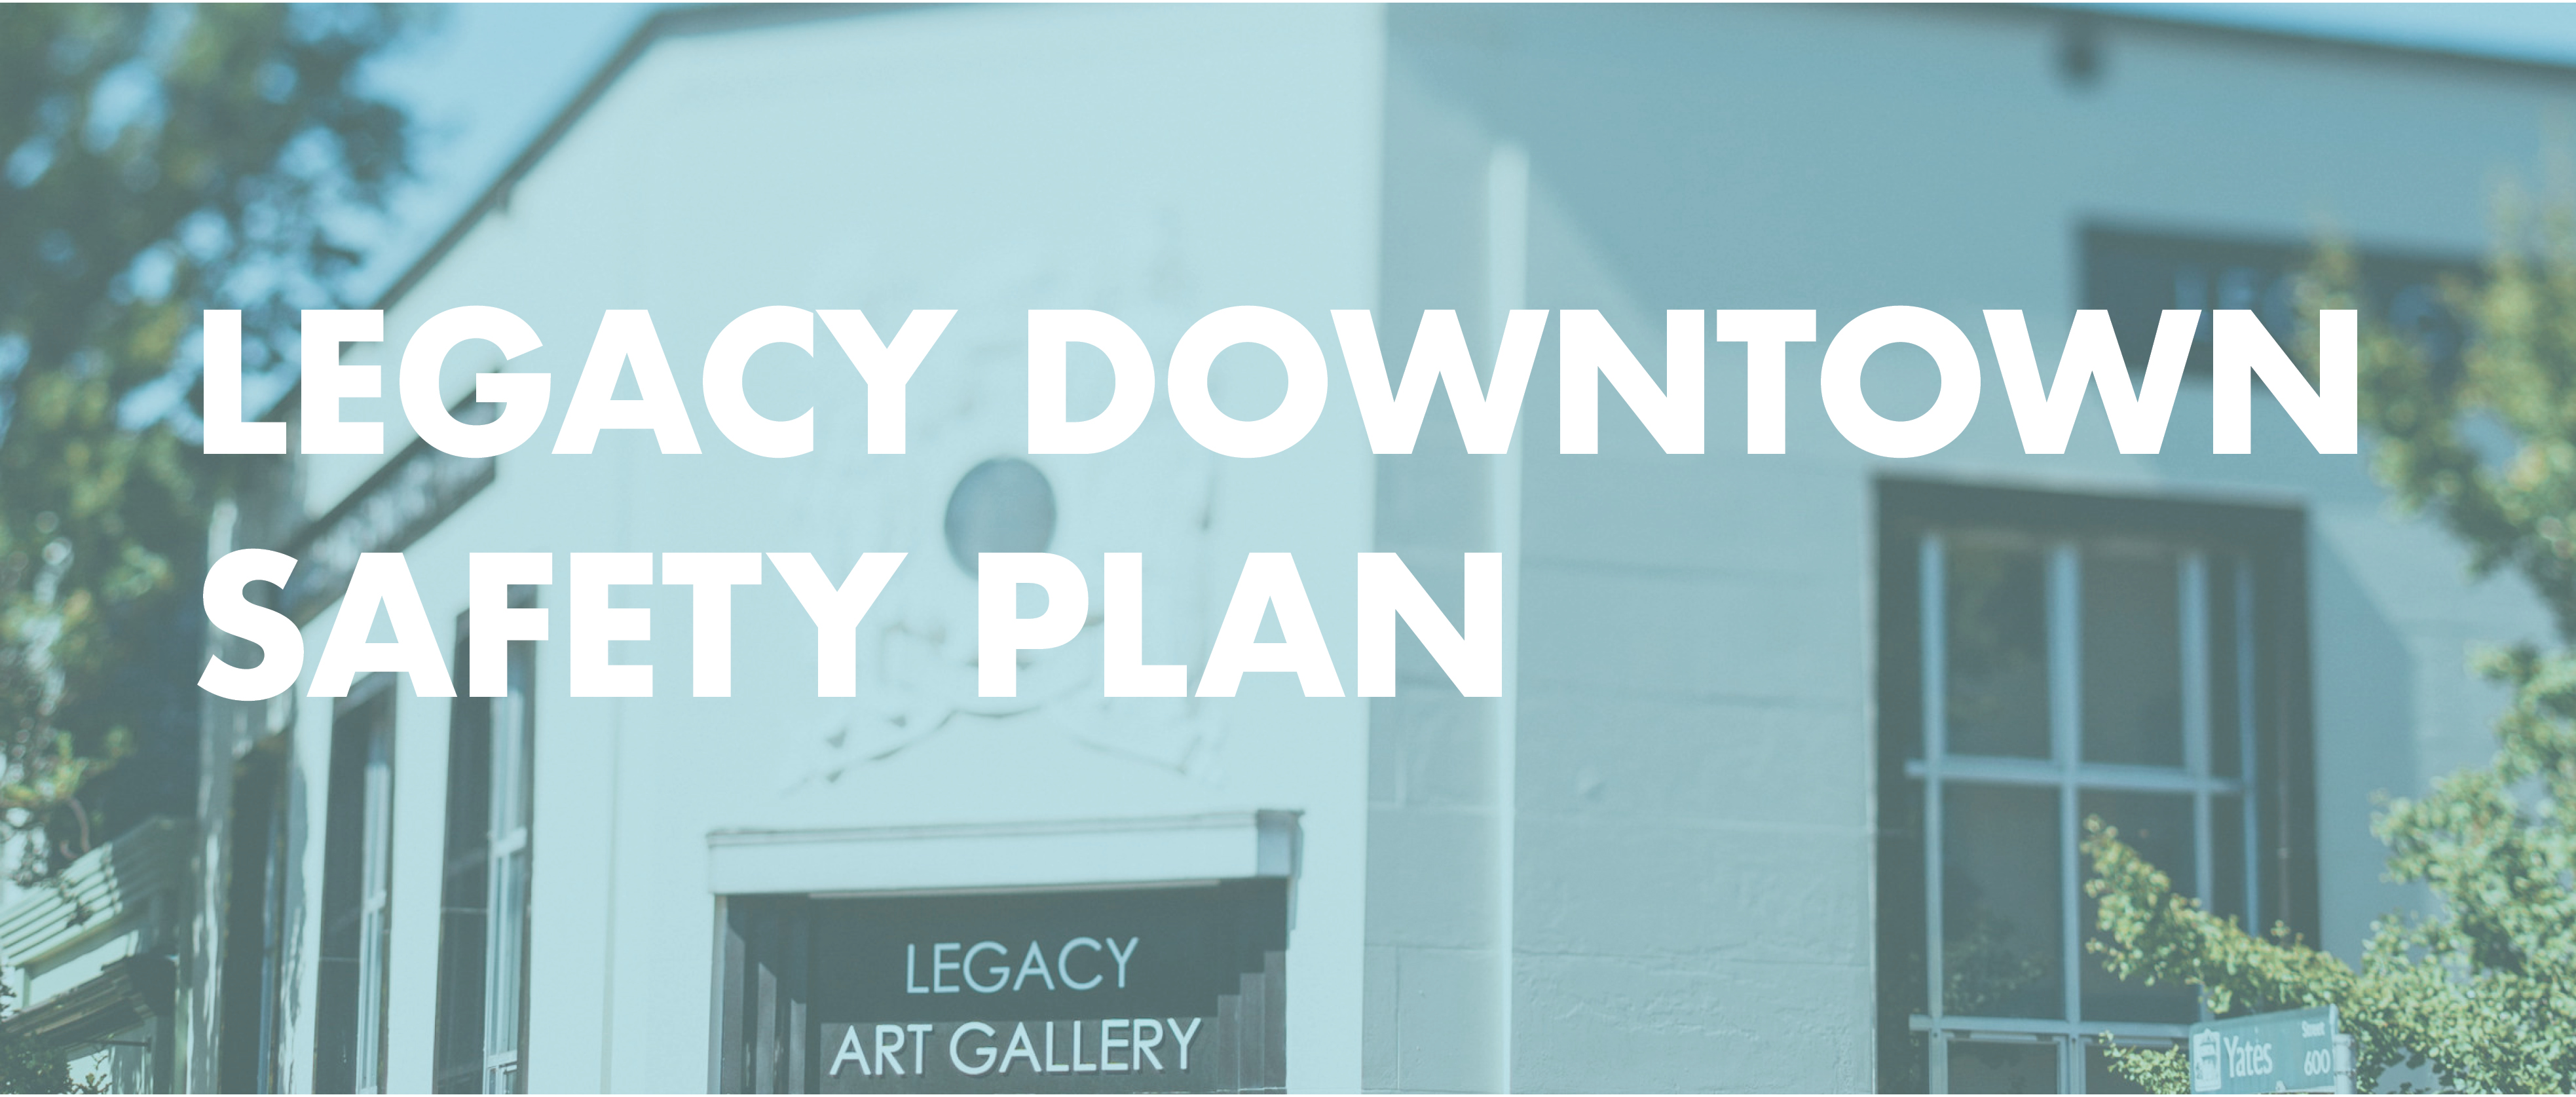 A cropped image of the exterior of Legacy Gallery Downtown with a blue hue and the text "Legacy Downtown Safety Plan"